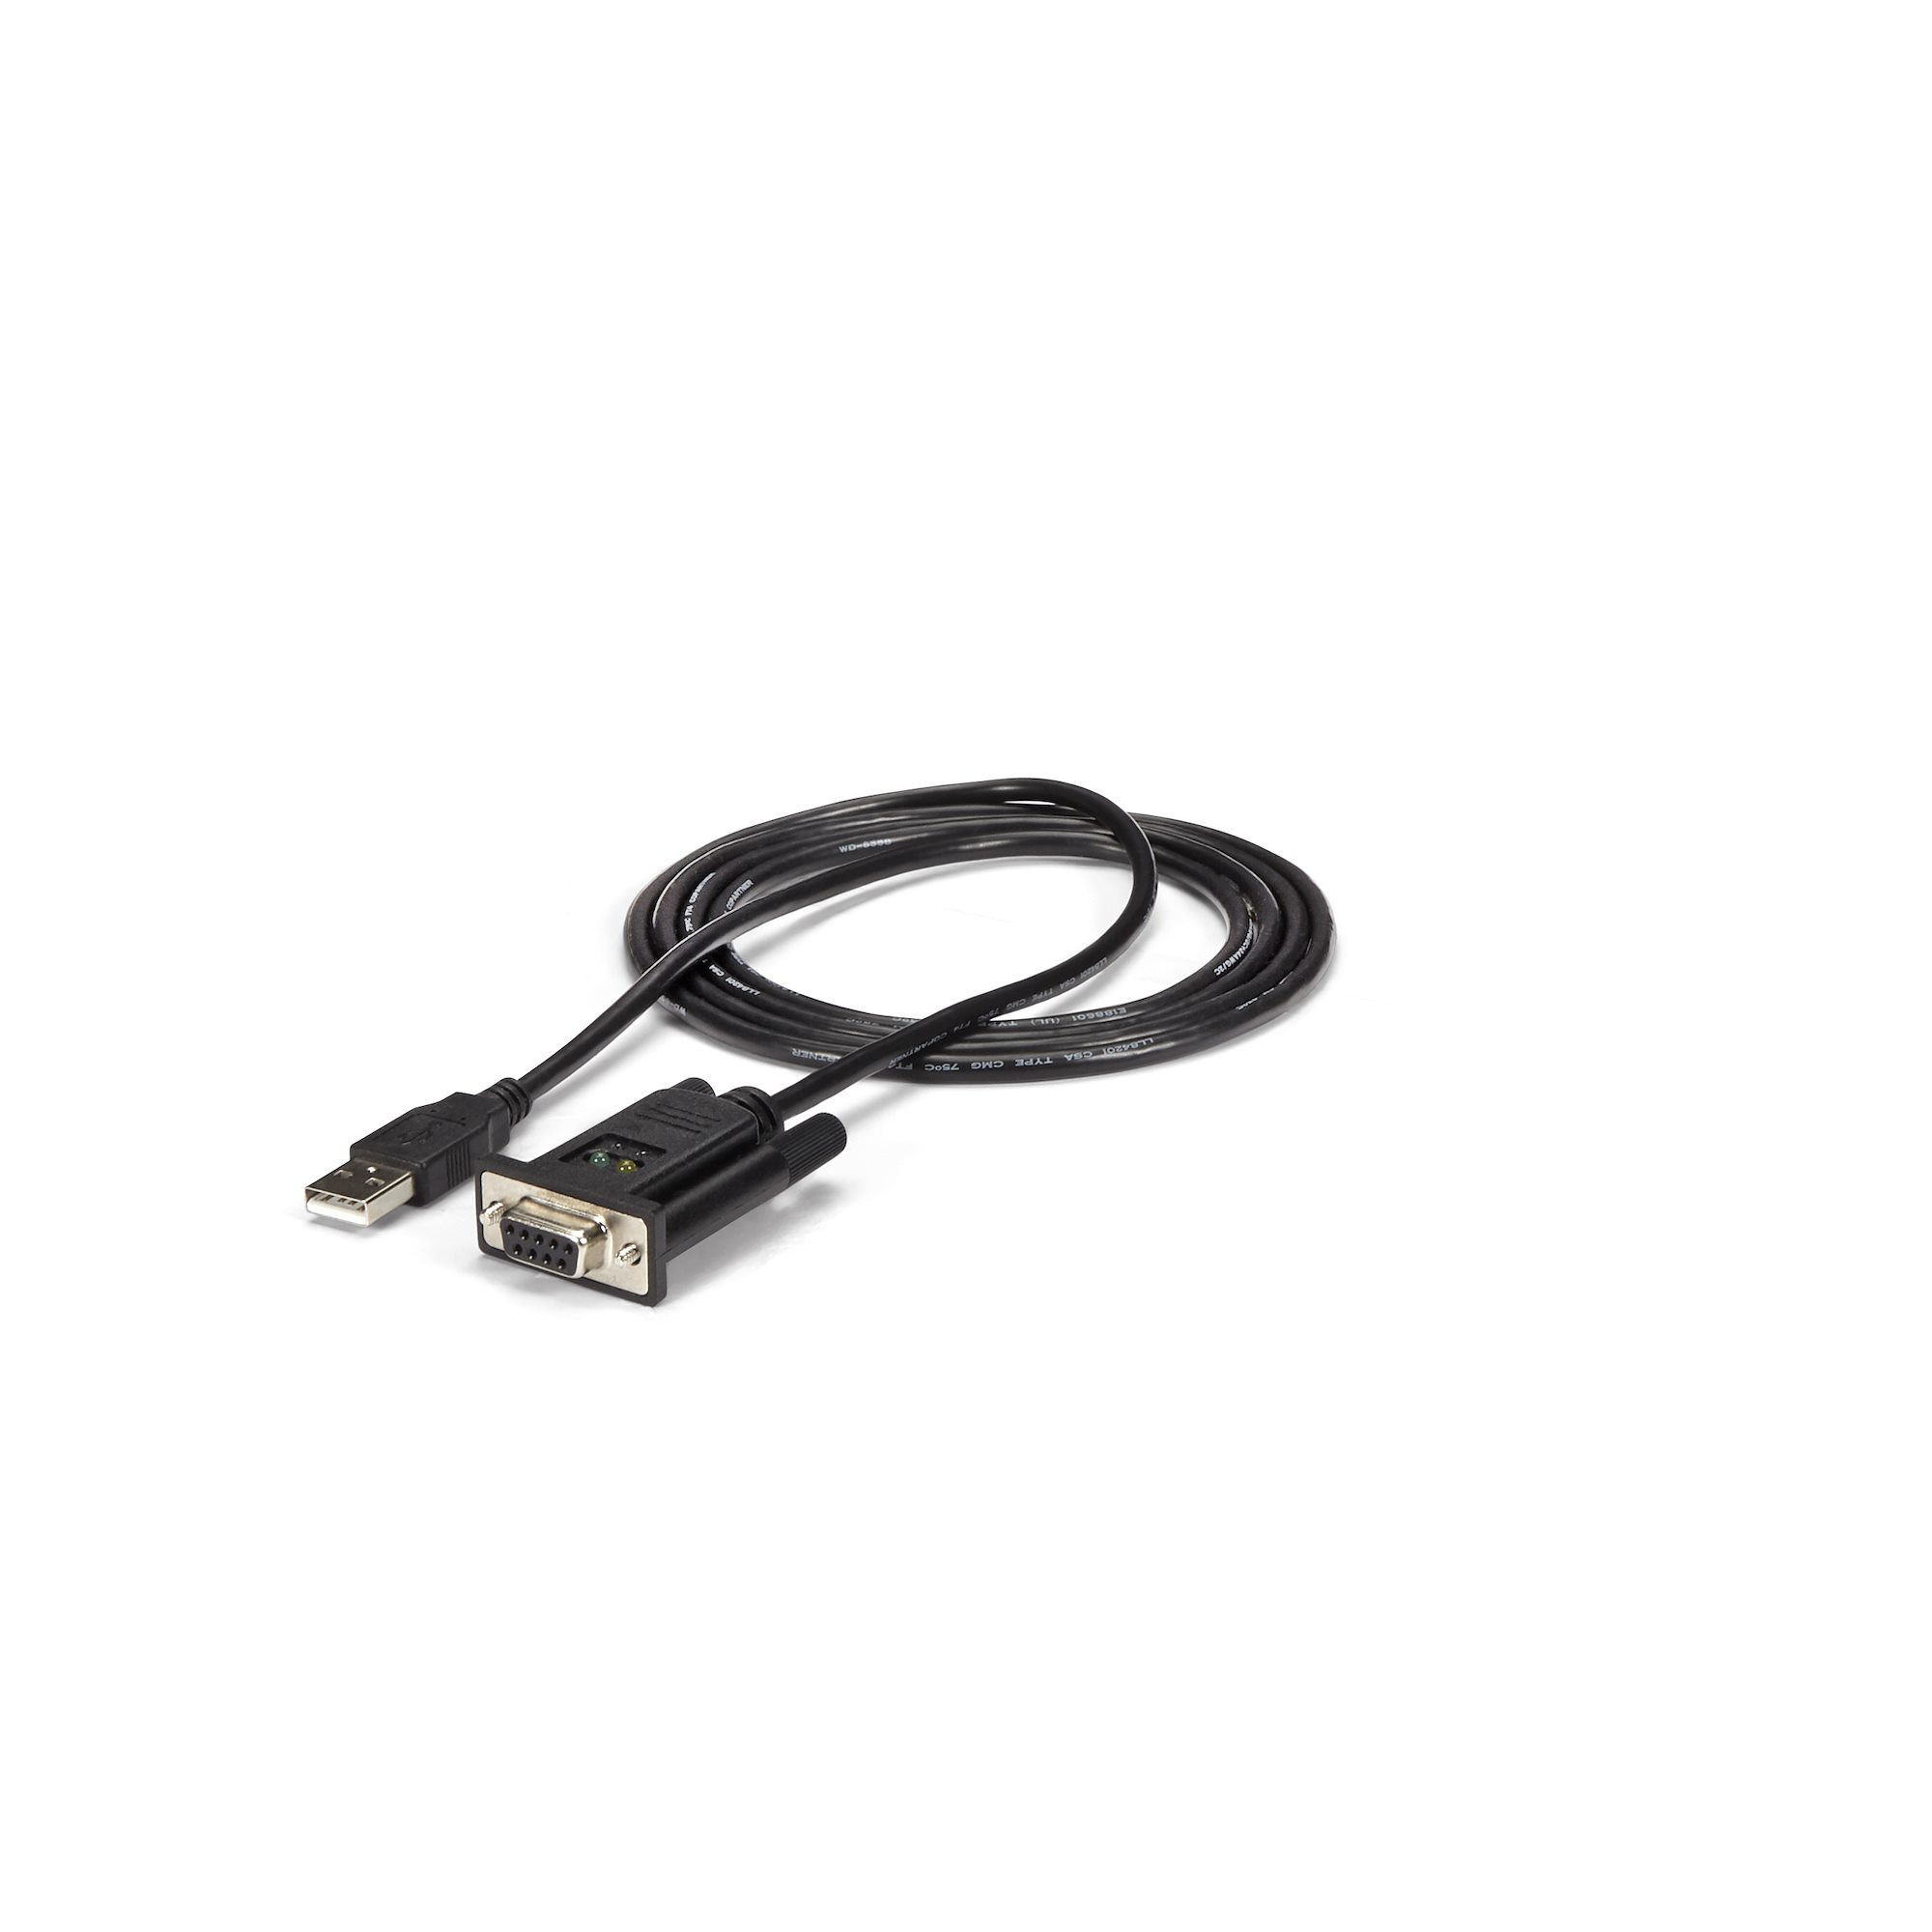 USB TO SERIAL CABLE USB TO RS232 USB 9 PIN SERIAL PORT - iFuture